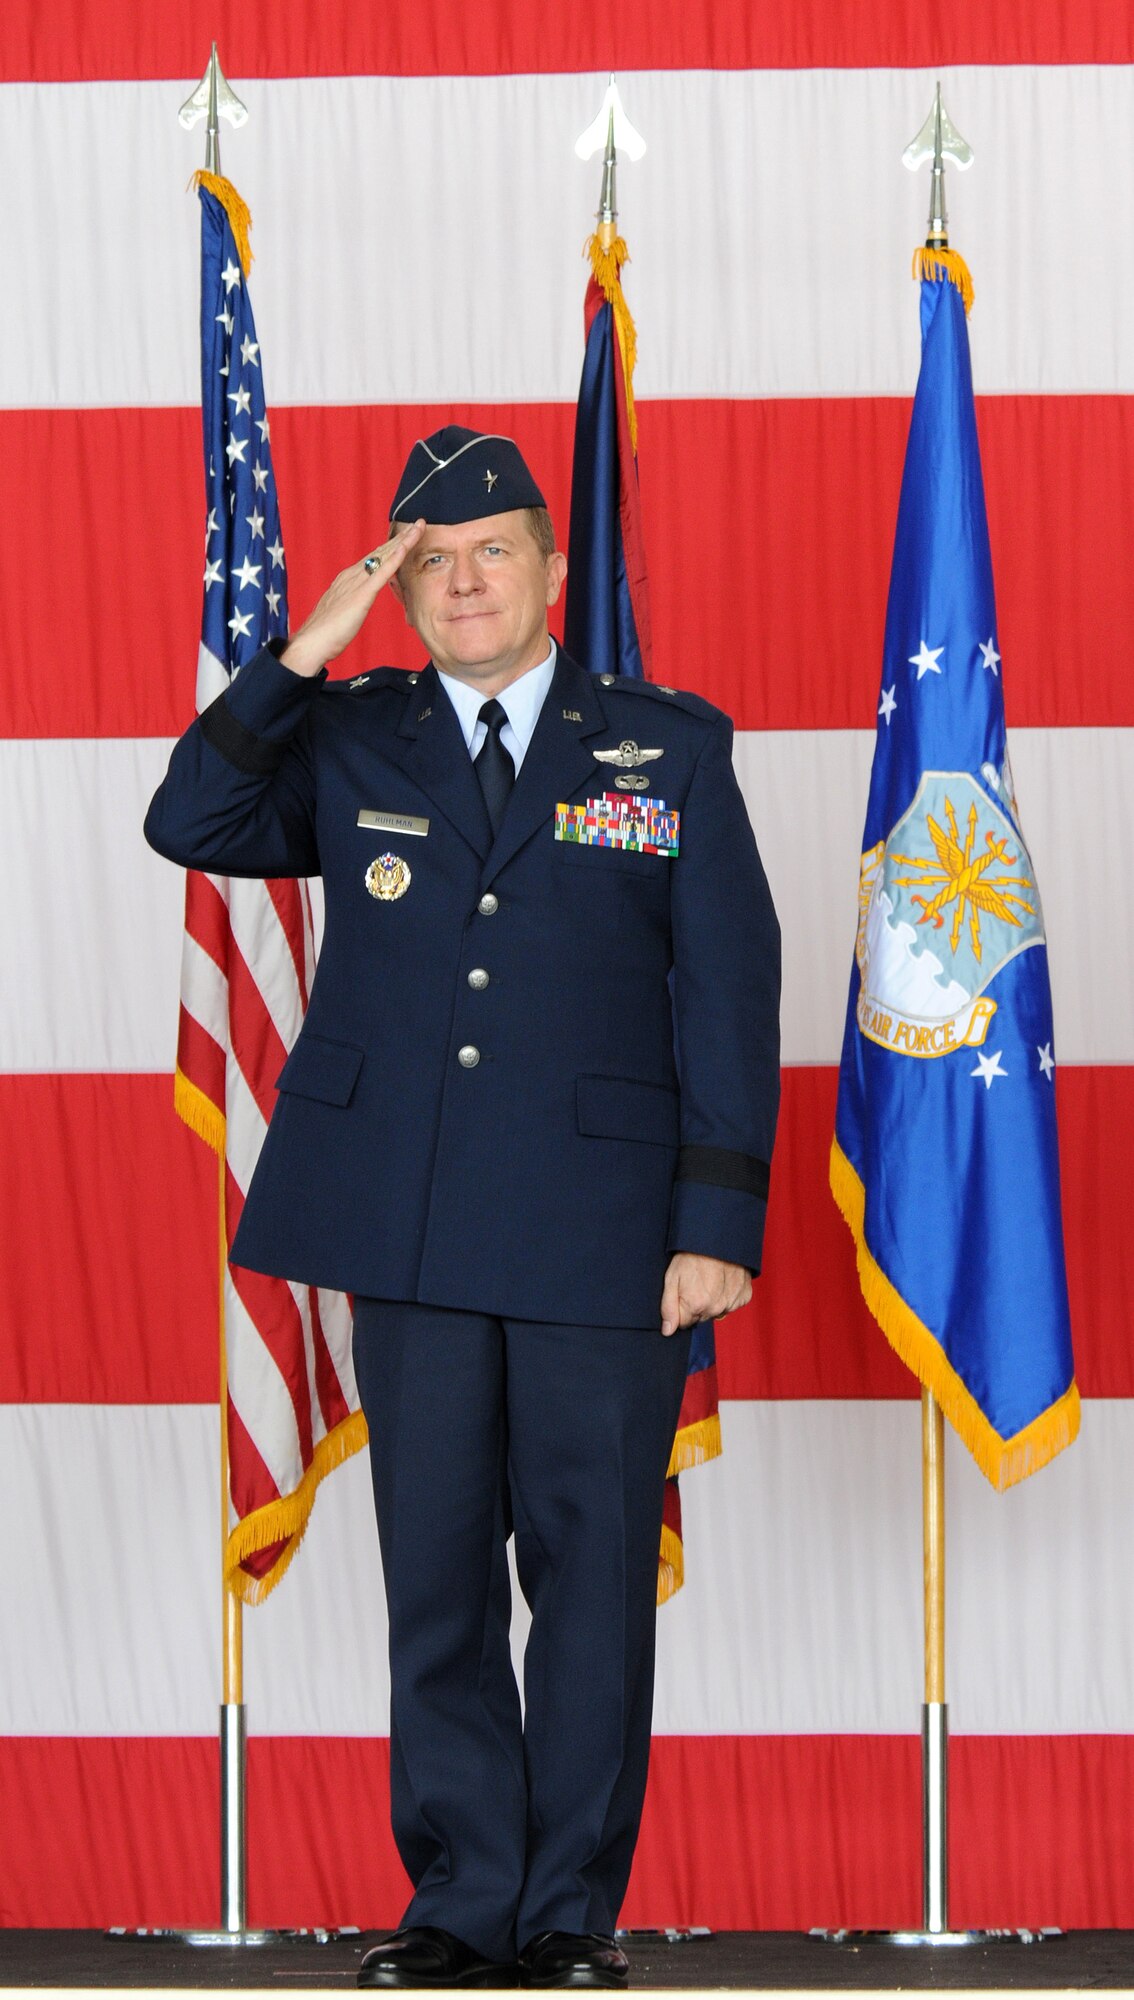 ANDERSEN AIR FORCE BASE, Guam - Brigadier Gen. Philip Ruhlman renders his first salute to his new Airmen Sept. 2 here. General Ruhlman has been in the Air Forrce for 28 years and has been stationed throughout the Pacific area of responsibility.  (U.S. Air Force by Airman 1st Class Courtney Witt)